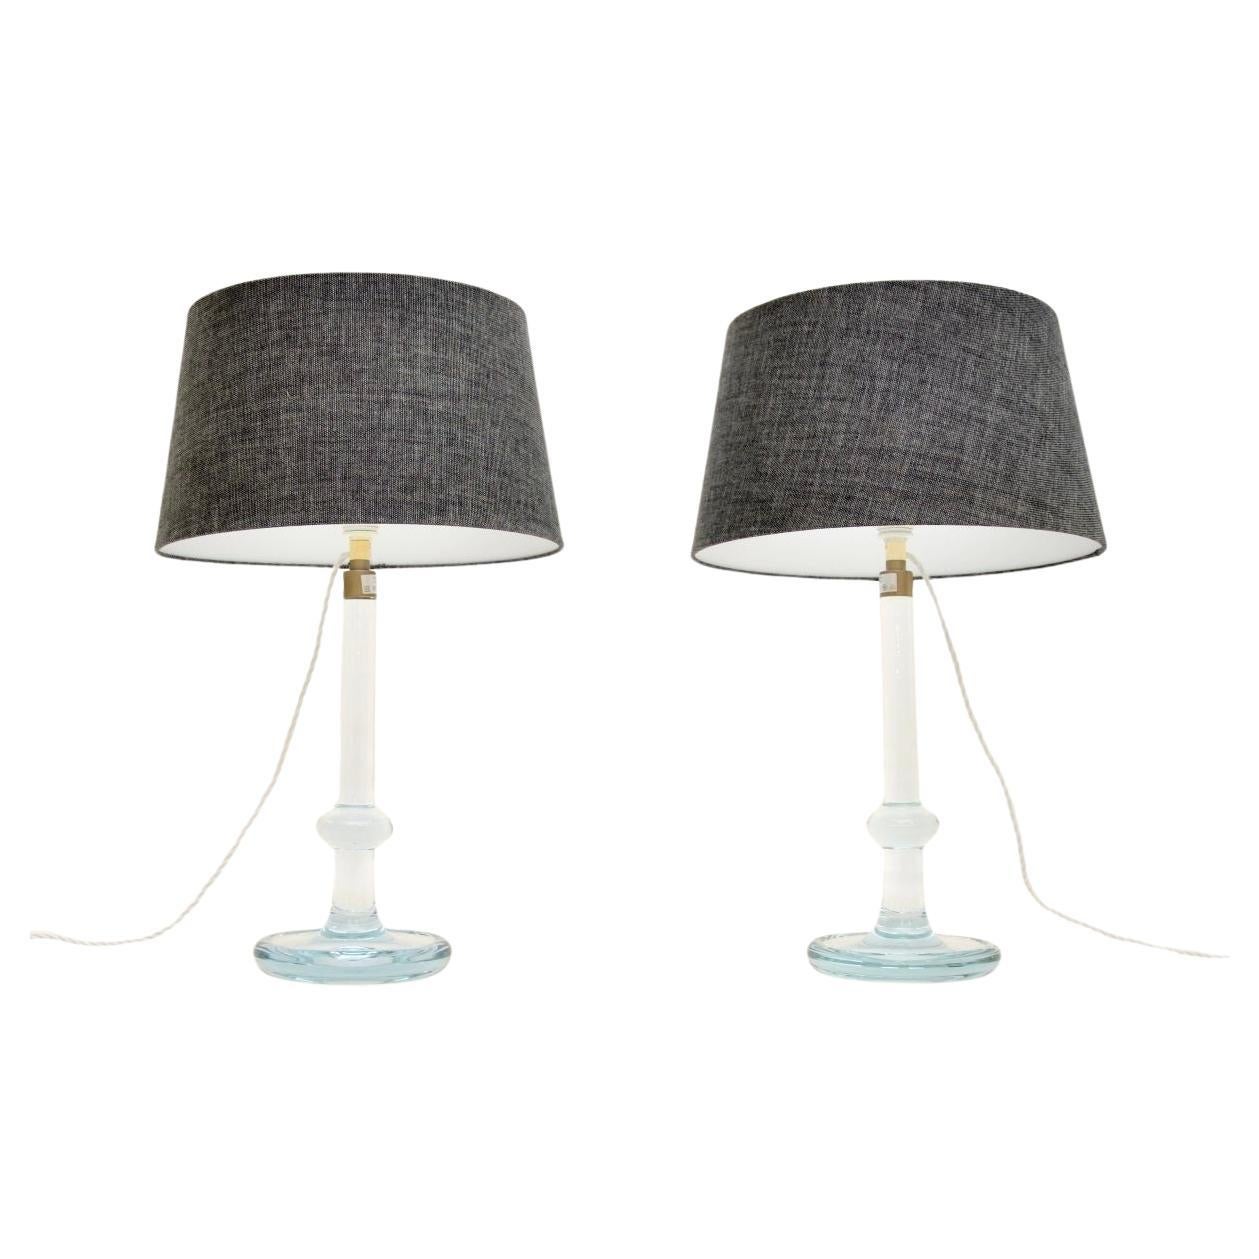 Pair of Danish Vintage Glass Table Lamps by Michael Bang for Holmegaard